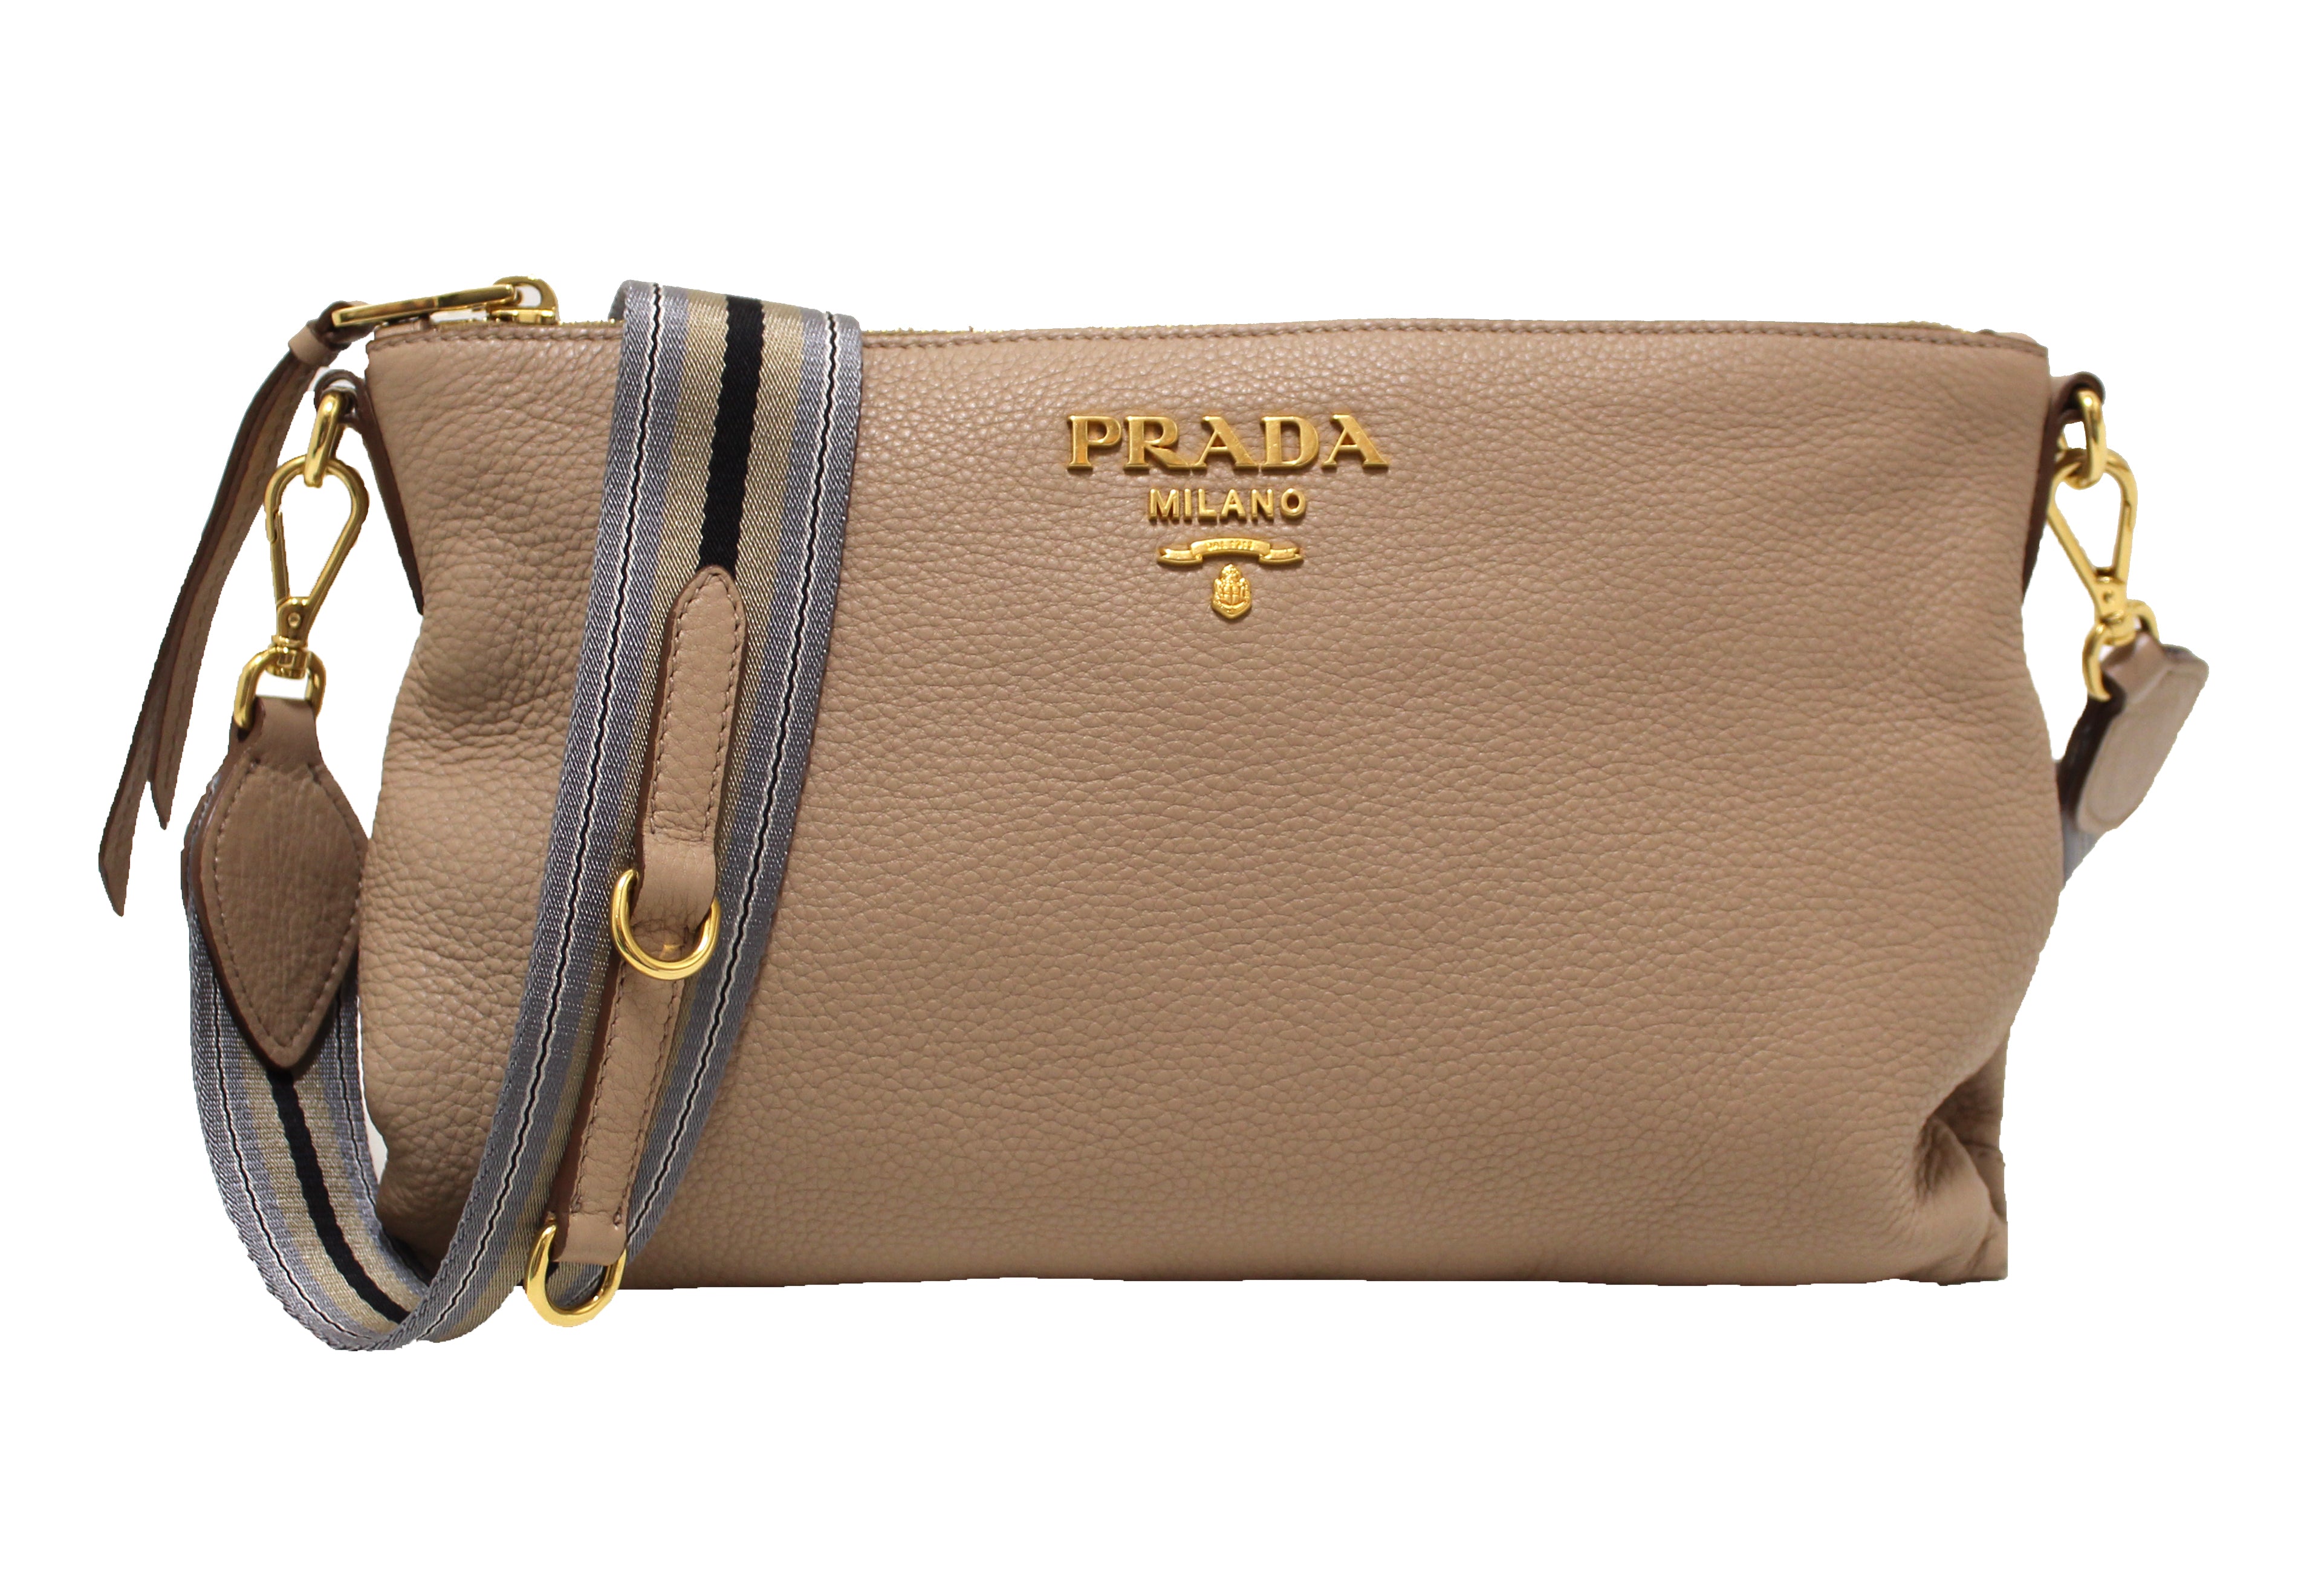 Authentic Prada Cameo Beige Calfskin Leather with Double Shoulder Bag